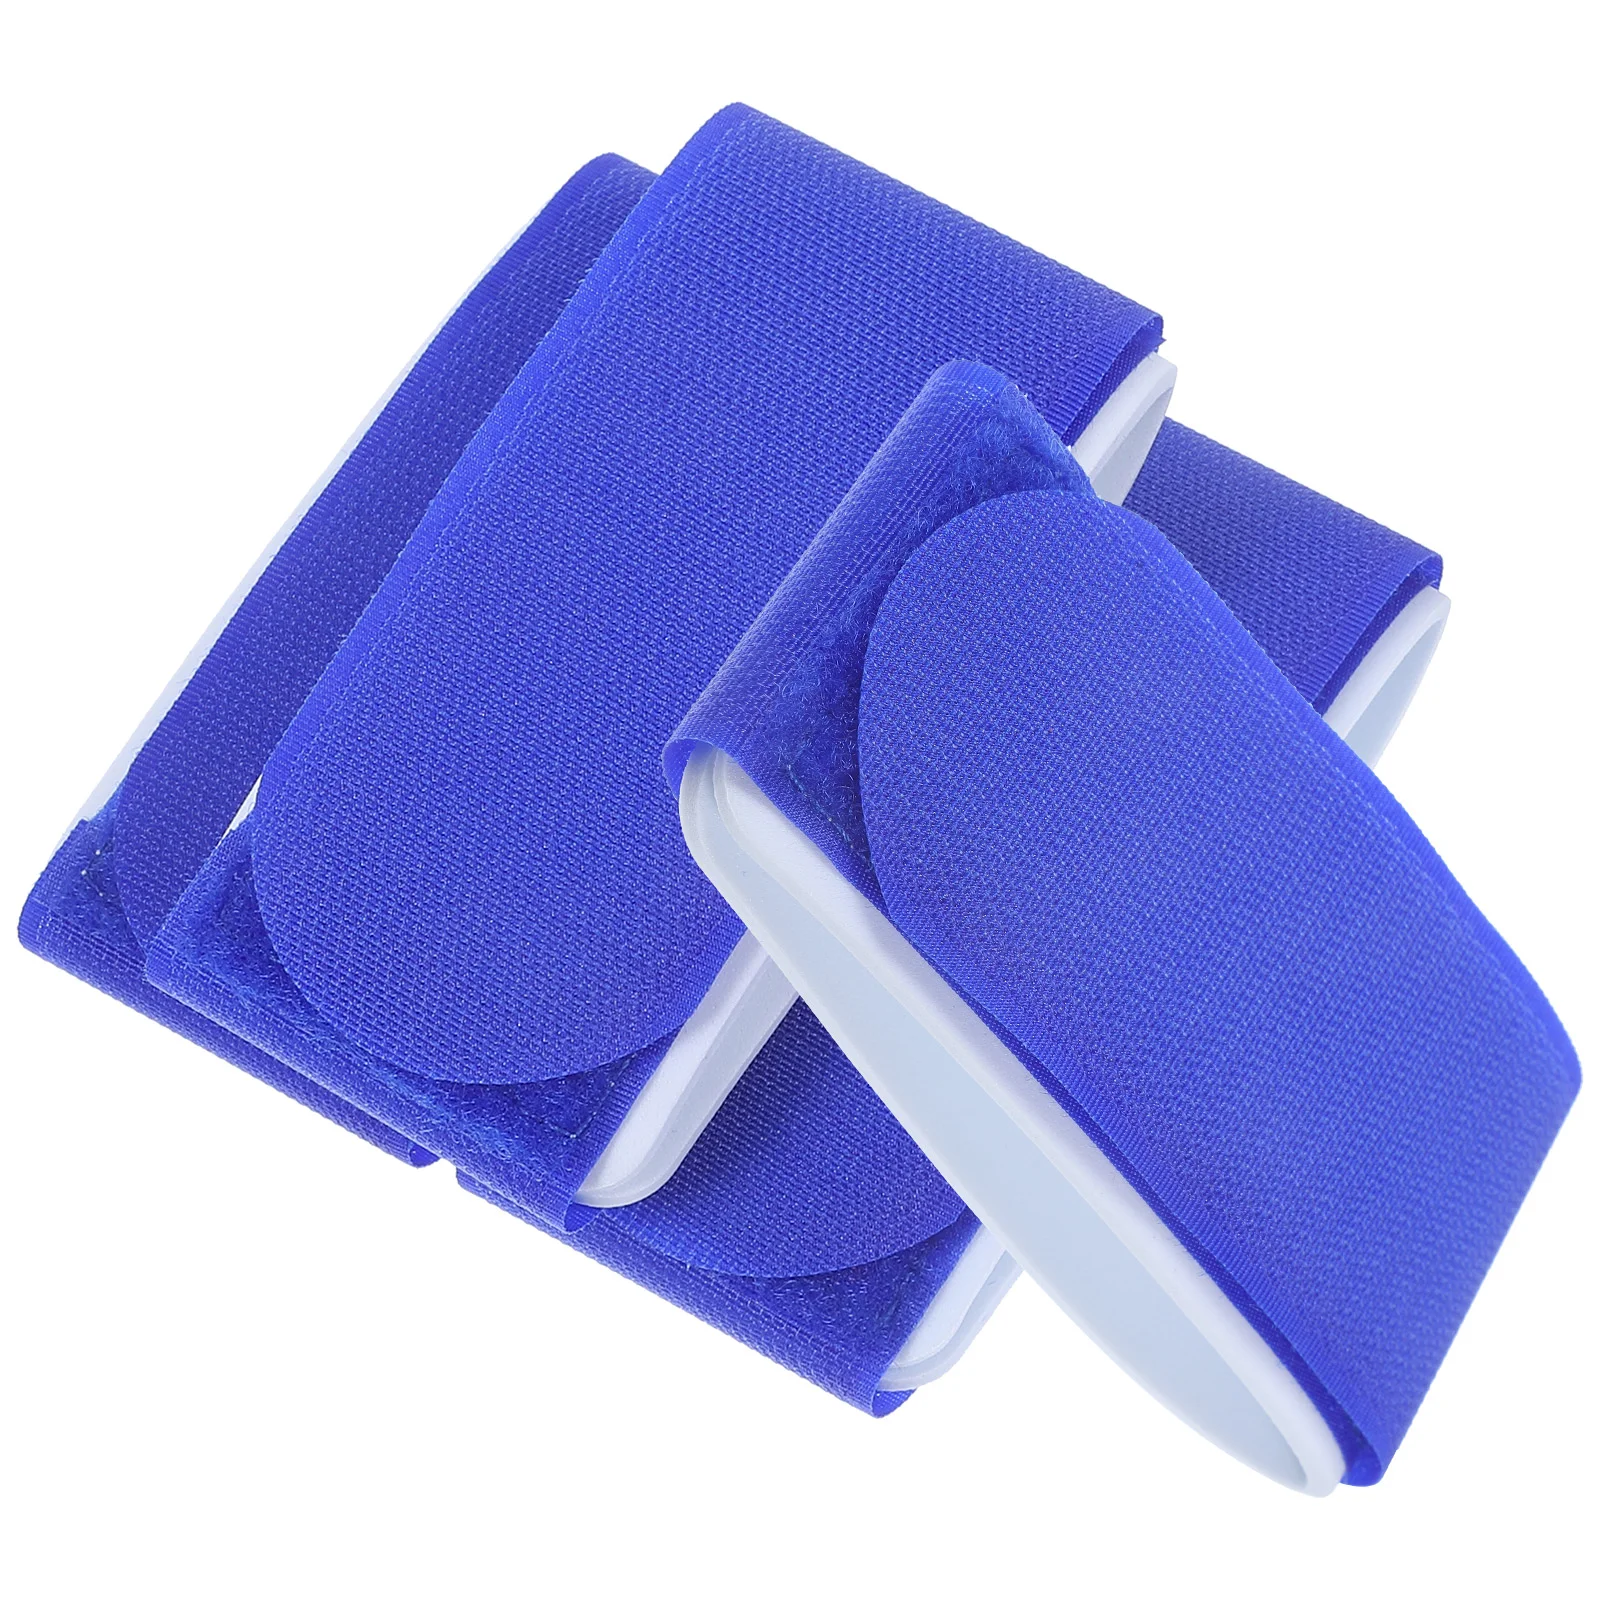 

4Pcs Carrying Strap For Snowboard Fixing Strap Fixing Strap Ski Fastening Straps Sled Fastener Sled Fixing Strap